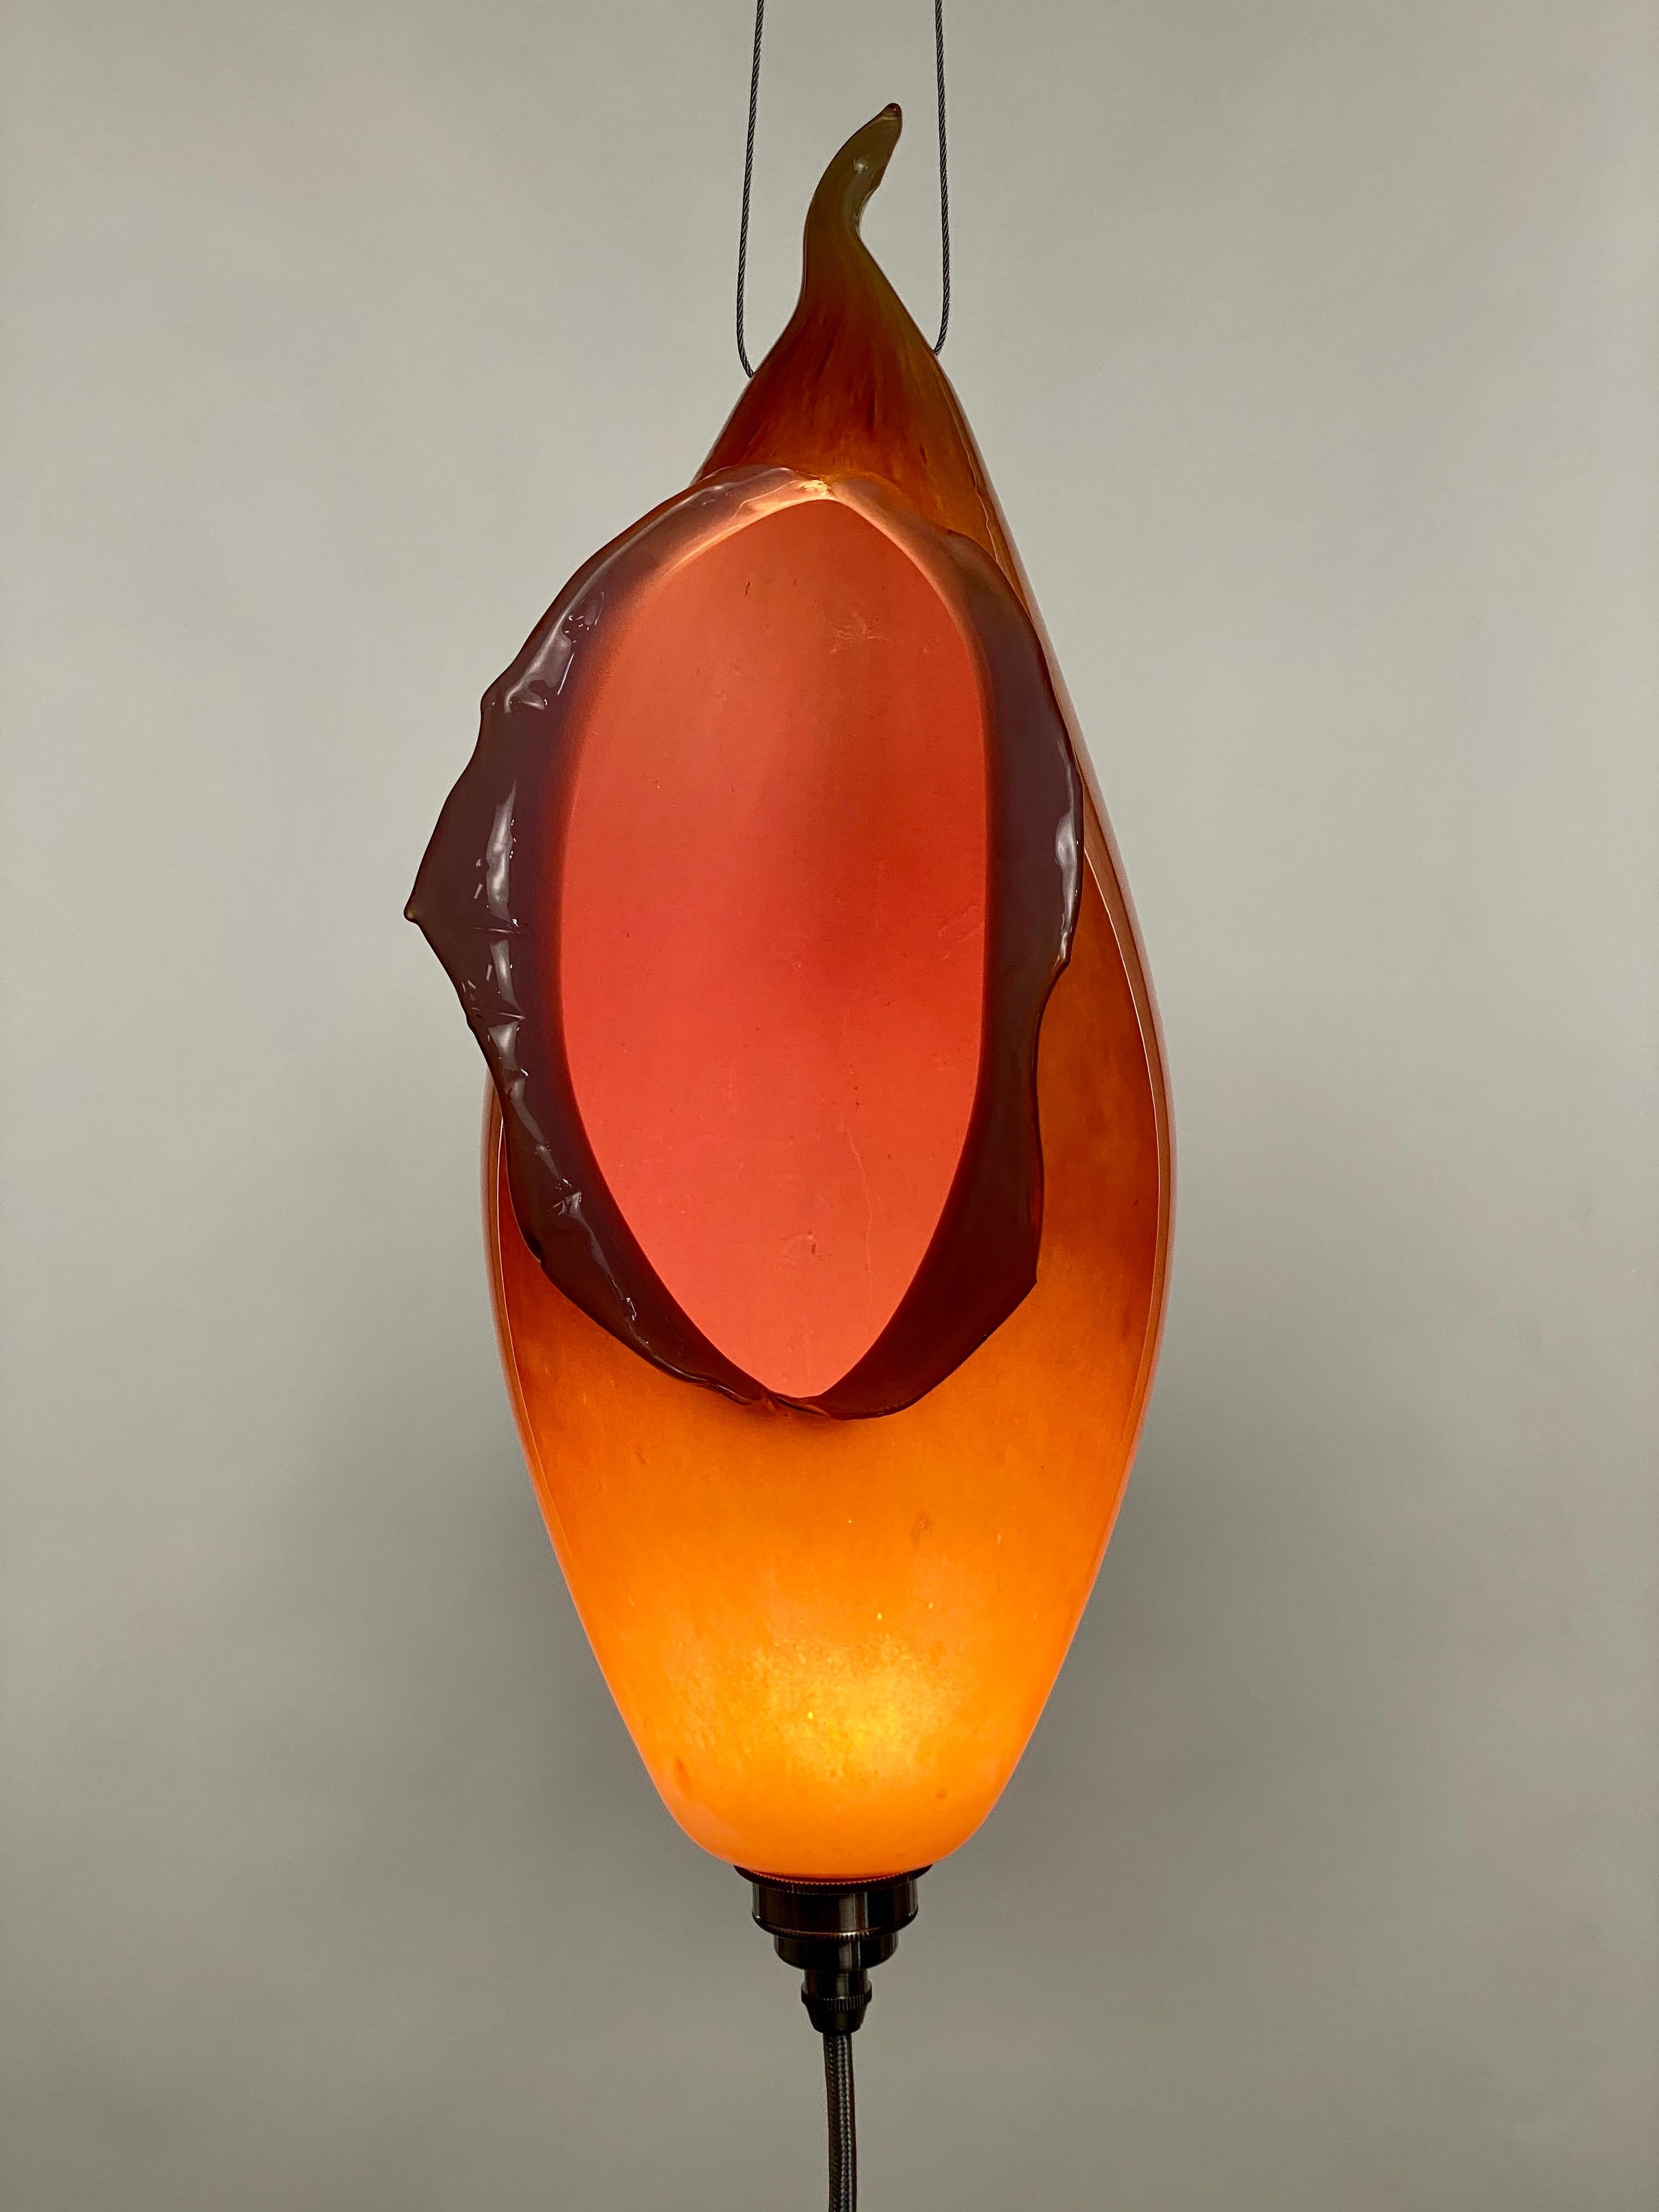 Blown Glass Pink and Orange Lamp Pendent Light, 21st Century by Mattia Biagi For Sale 8